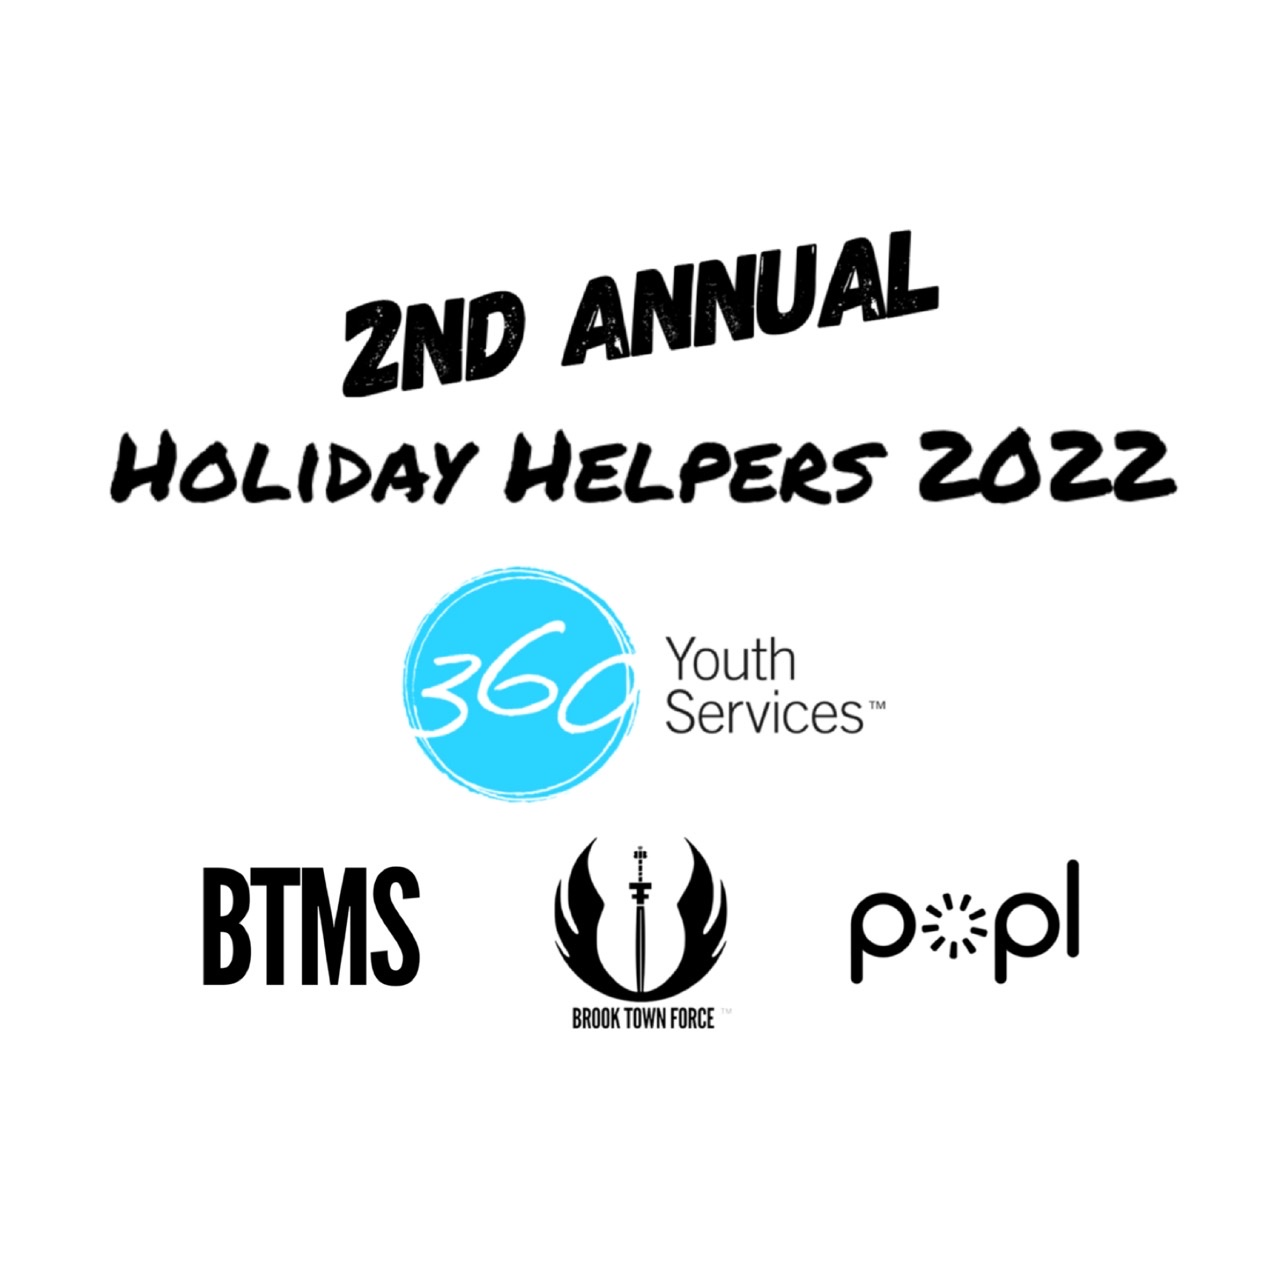 2nd Annual Holiday Helpers 2022 Helping Homeless Kids During Holidays by giving care packages, bedding sets, gift cards & more! on dic. 23, 19:00@Bar Louie - Compra entradas y obtén información enBTMS LLC 